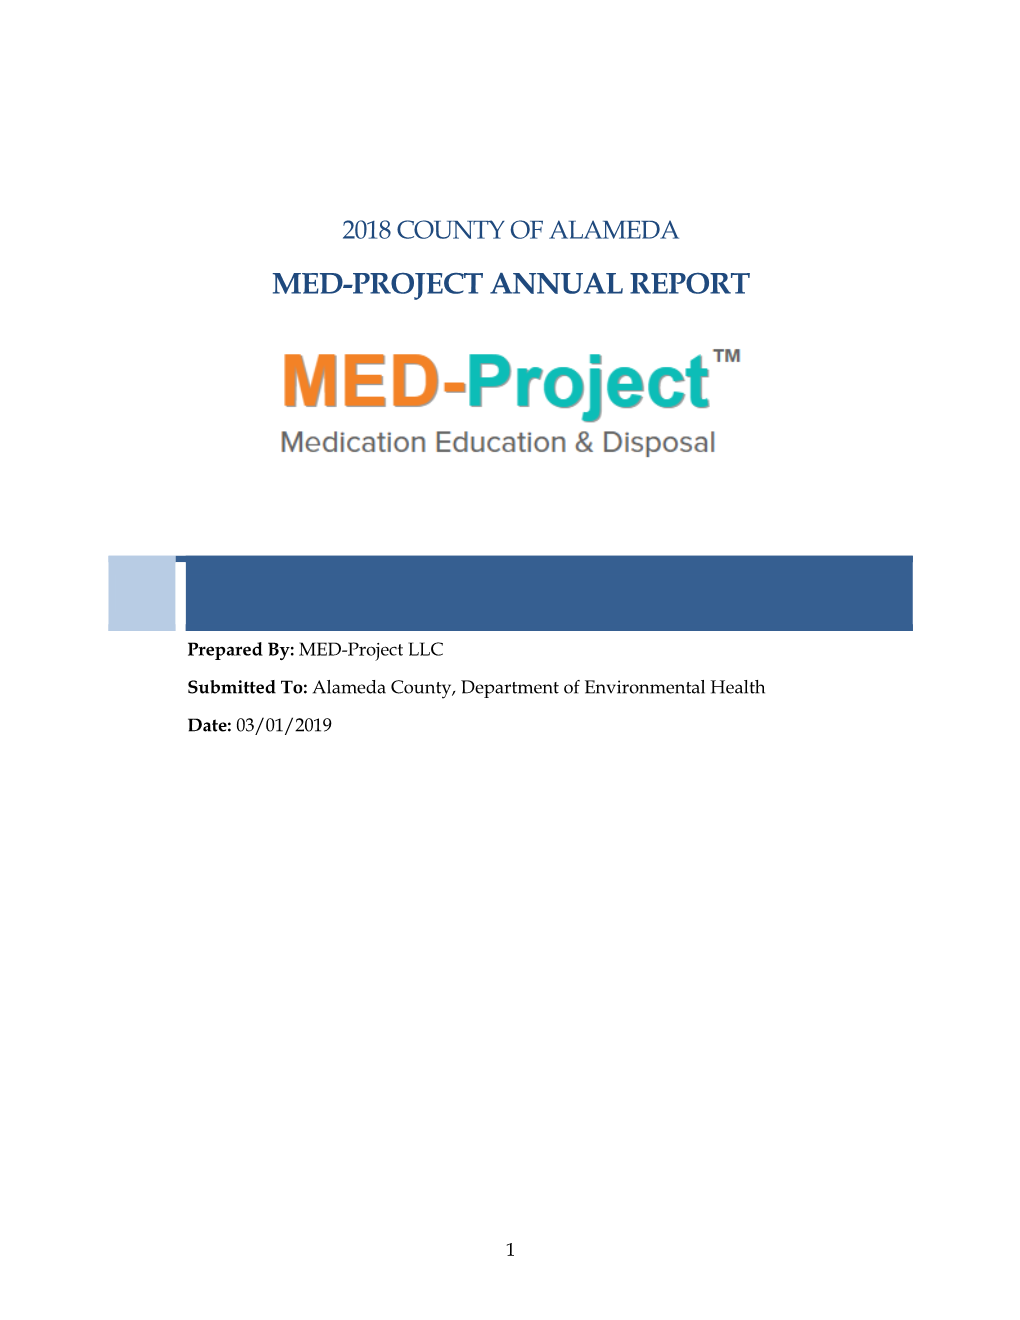 Med-Project Annual Report